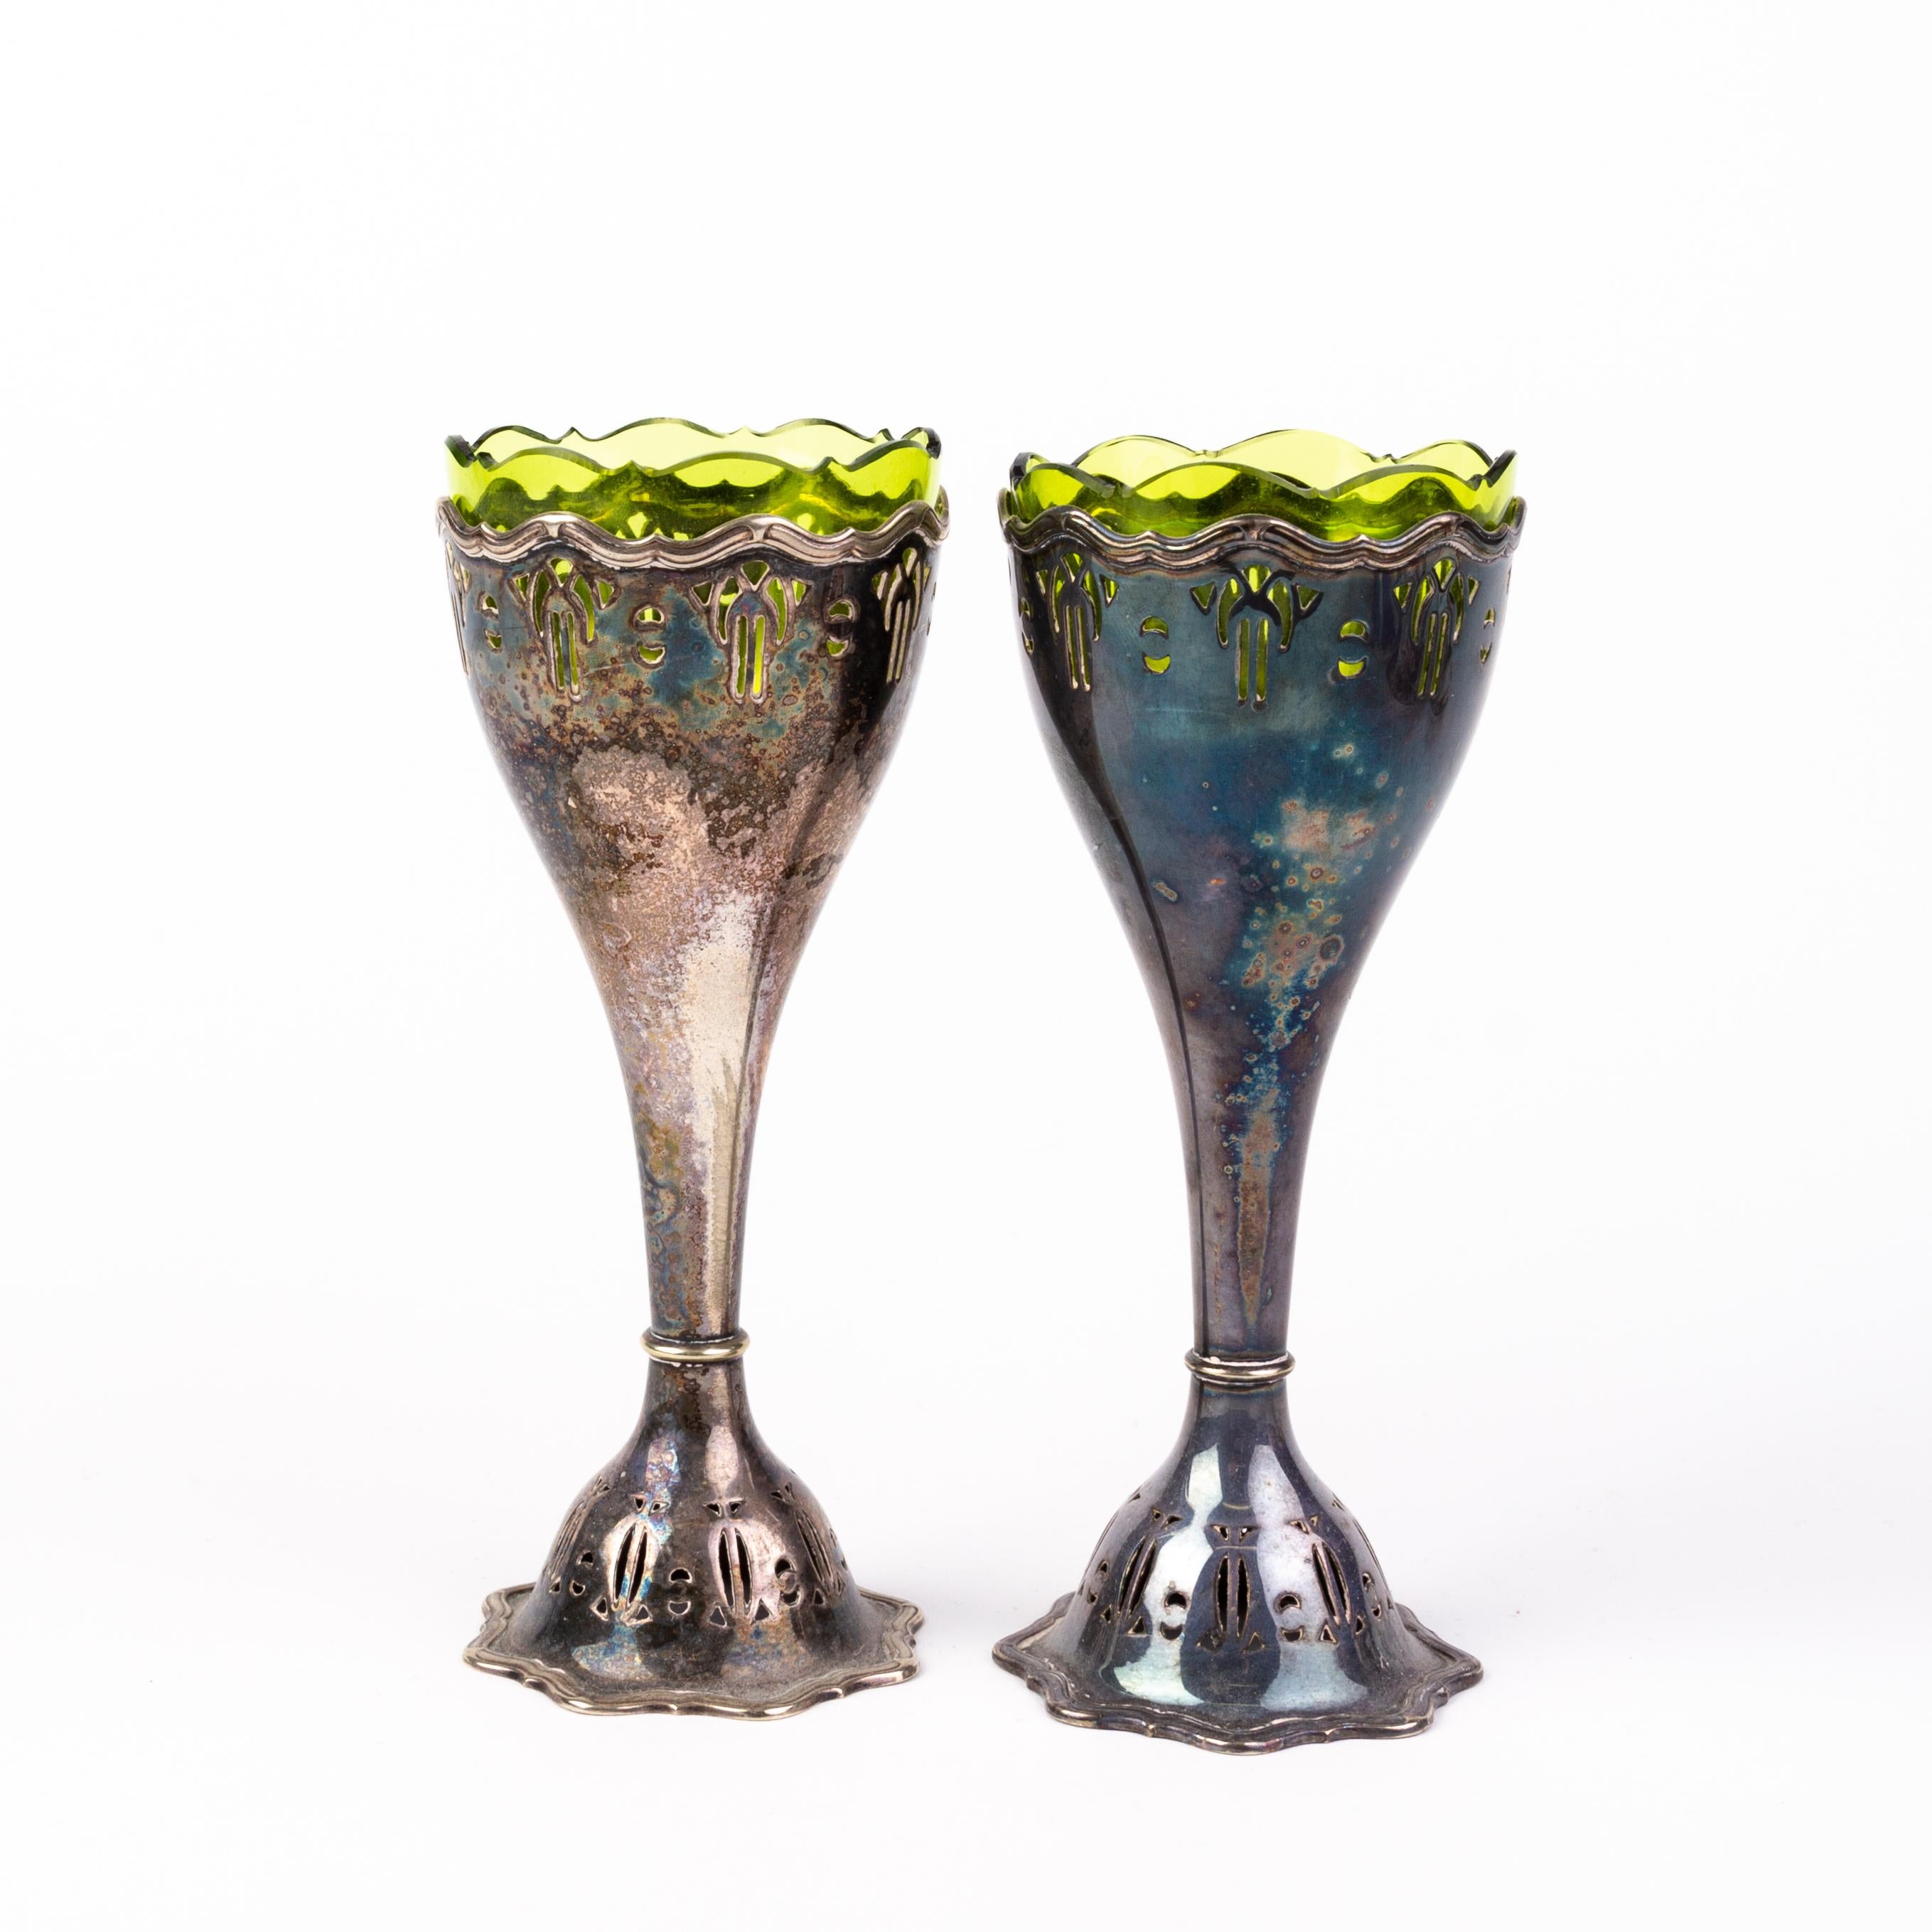 20th Century Art Nouveau Silver Plated Spill Vases with Glass Liners For Sale